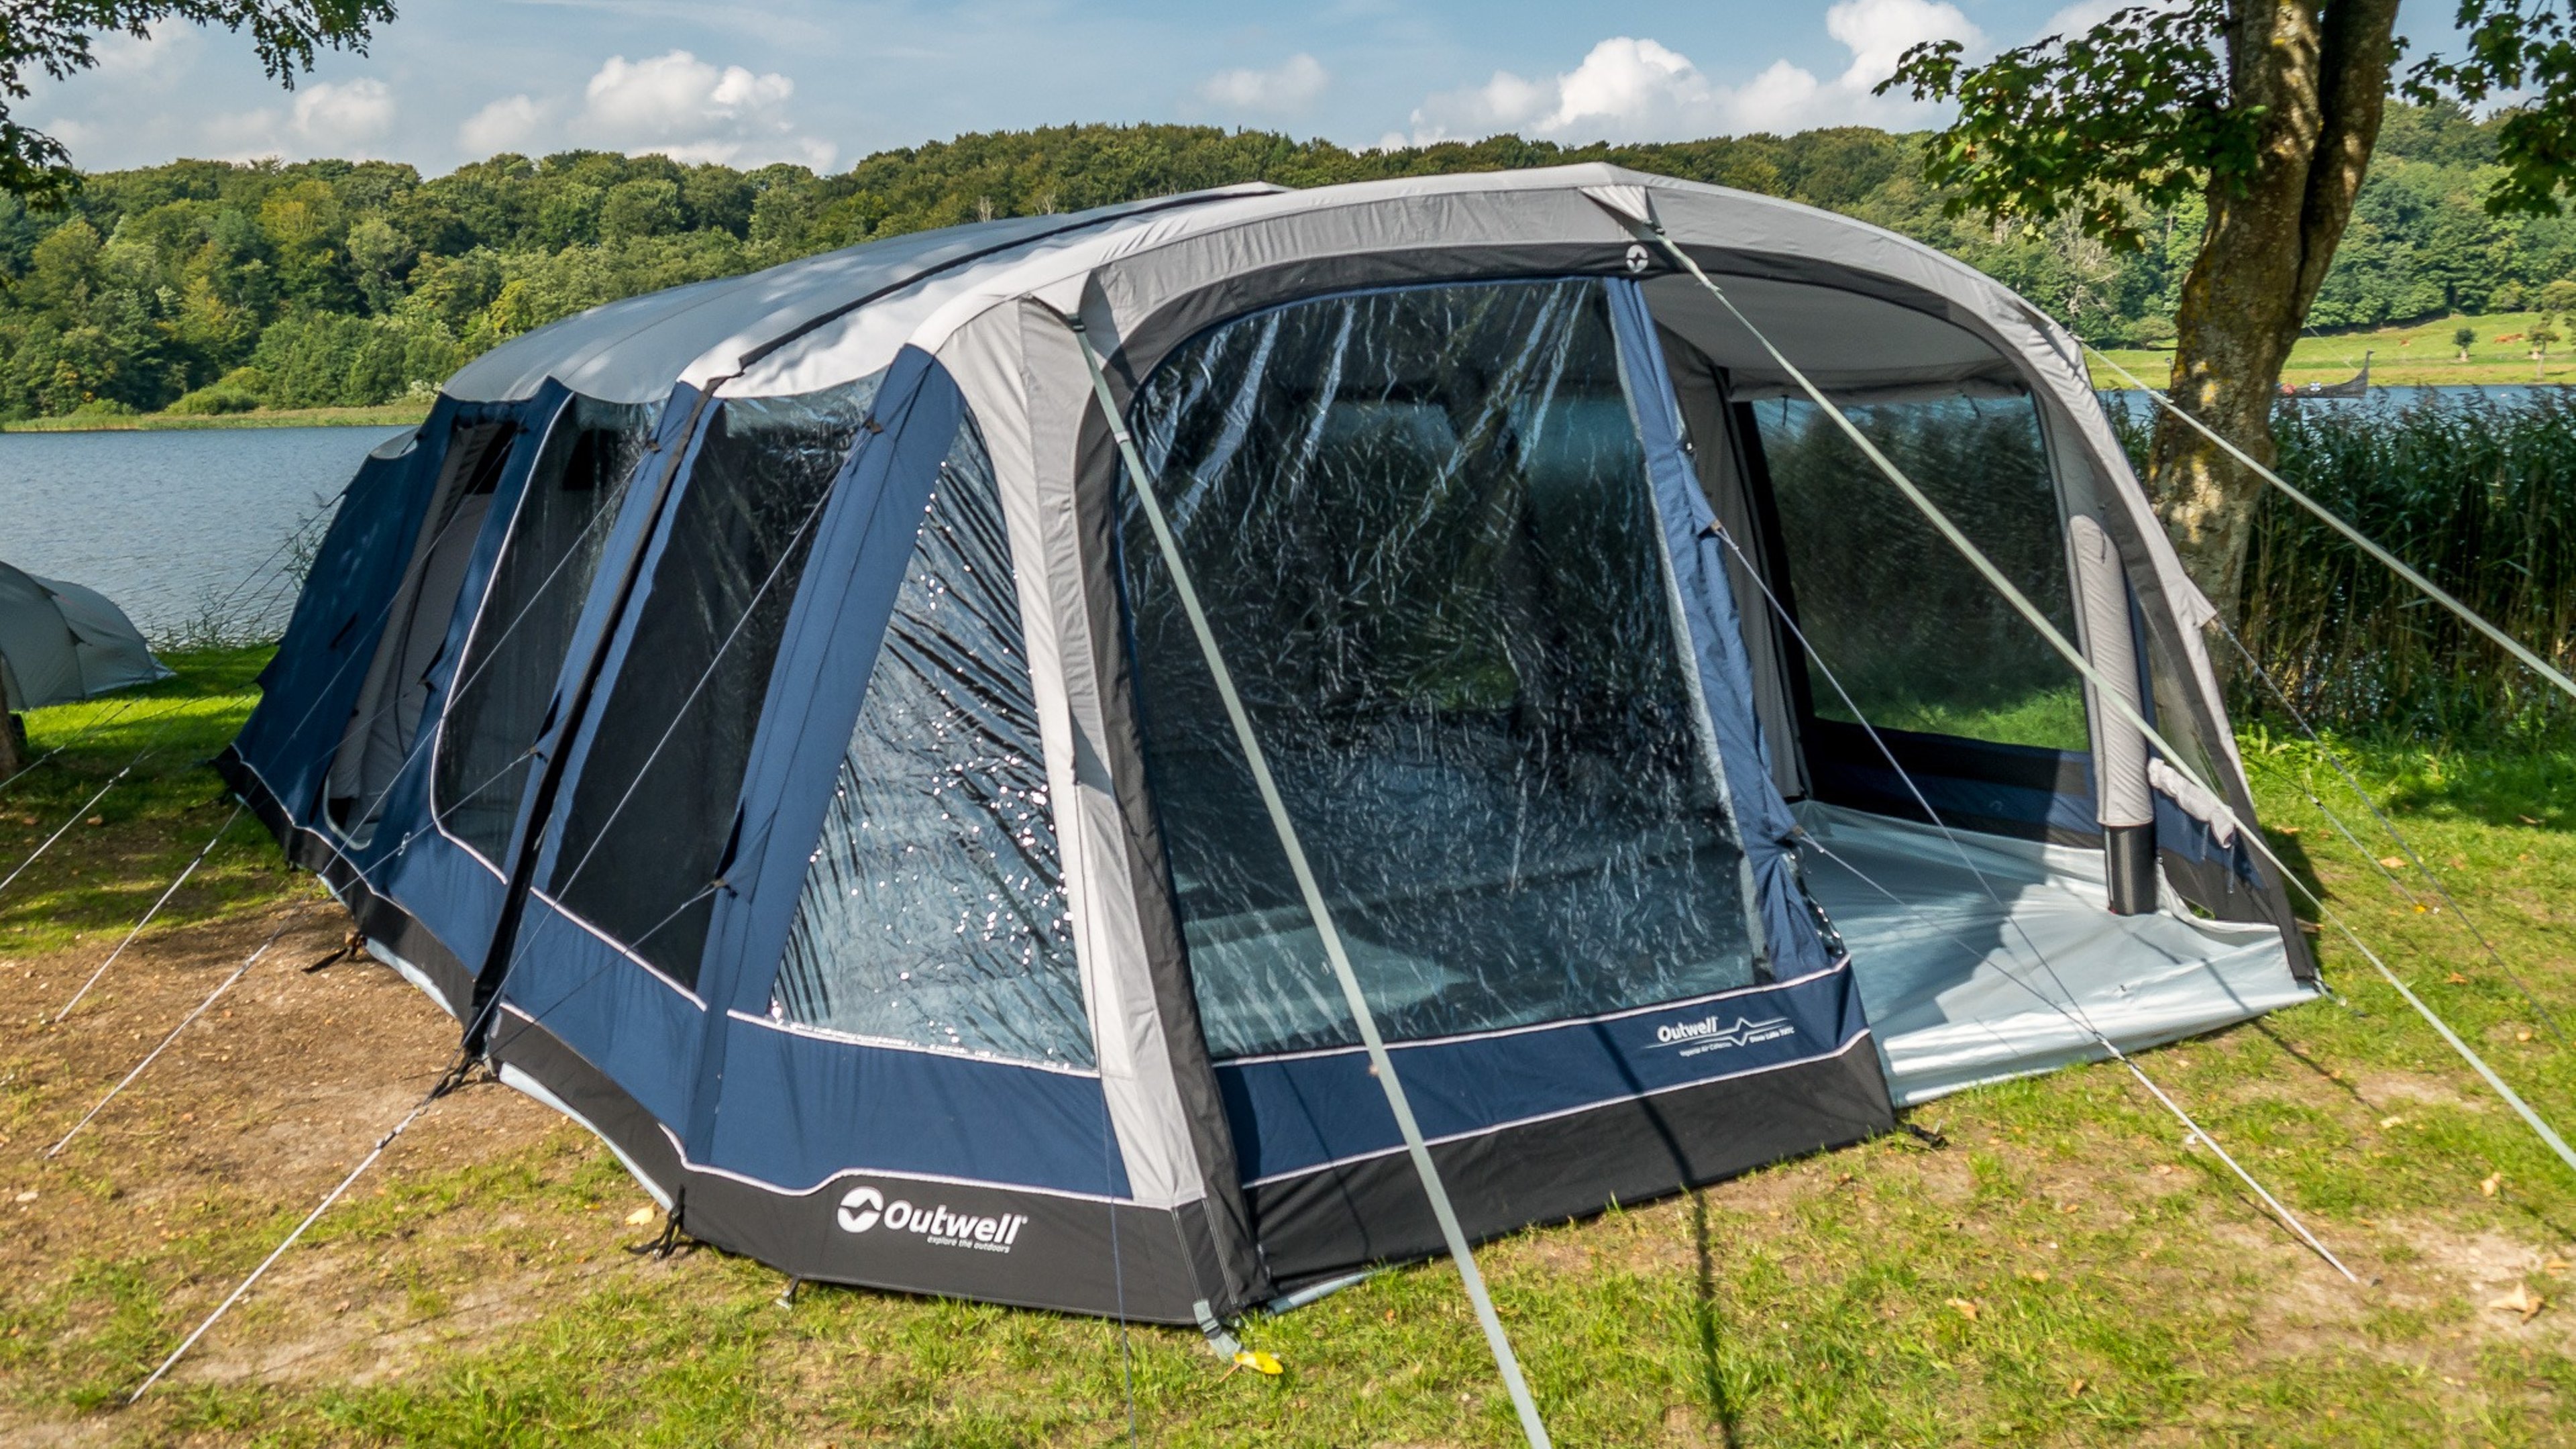 The Outwell Stone Lake 7ATC family tent